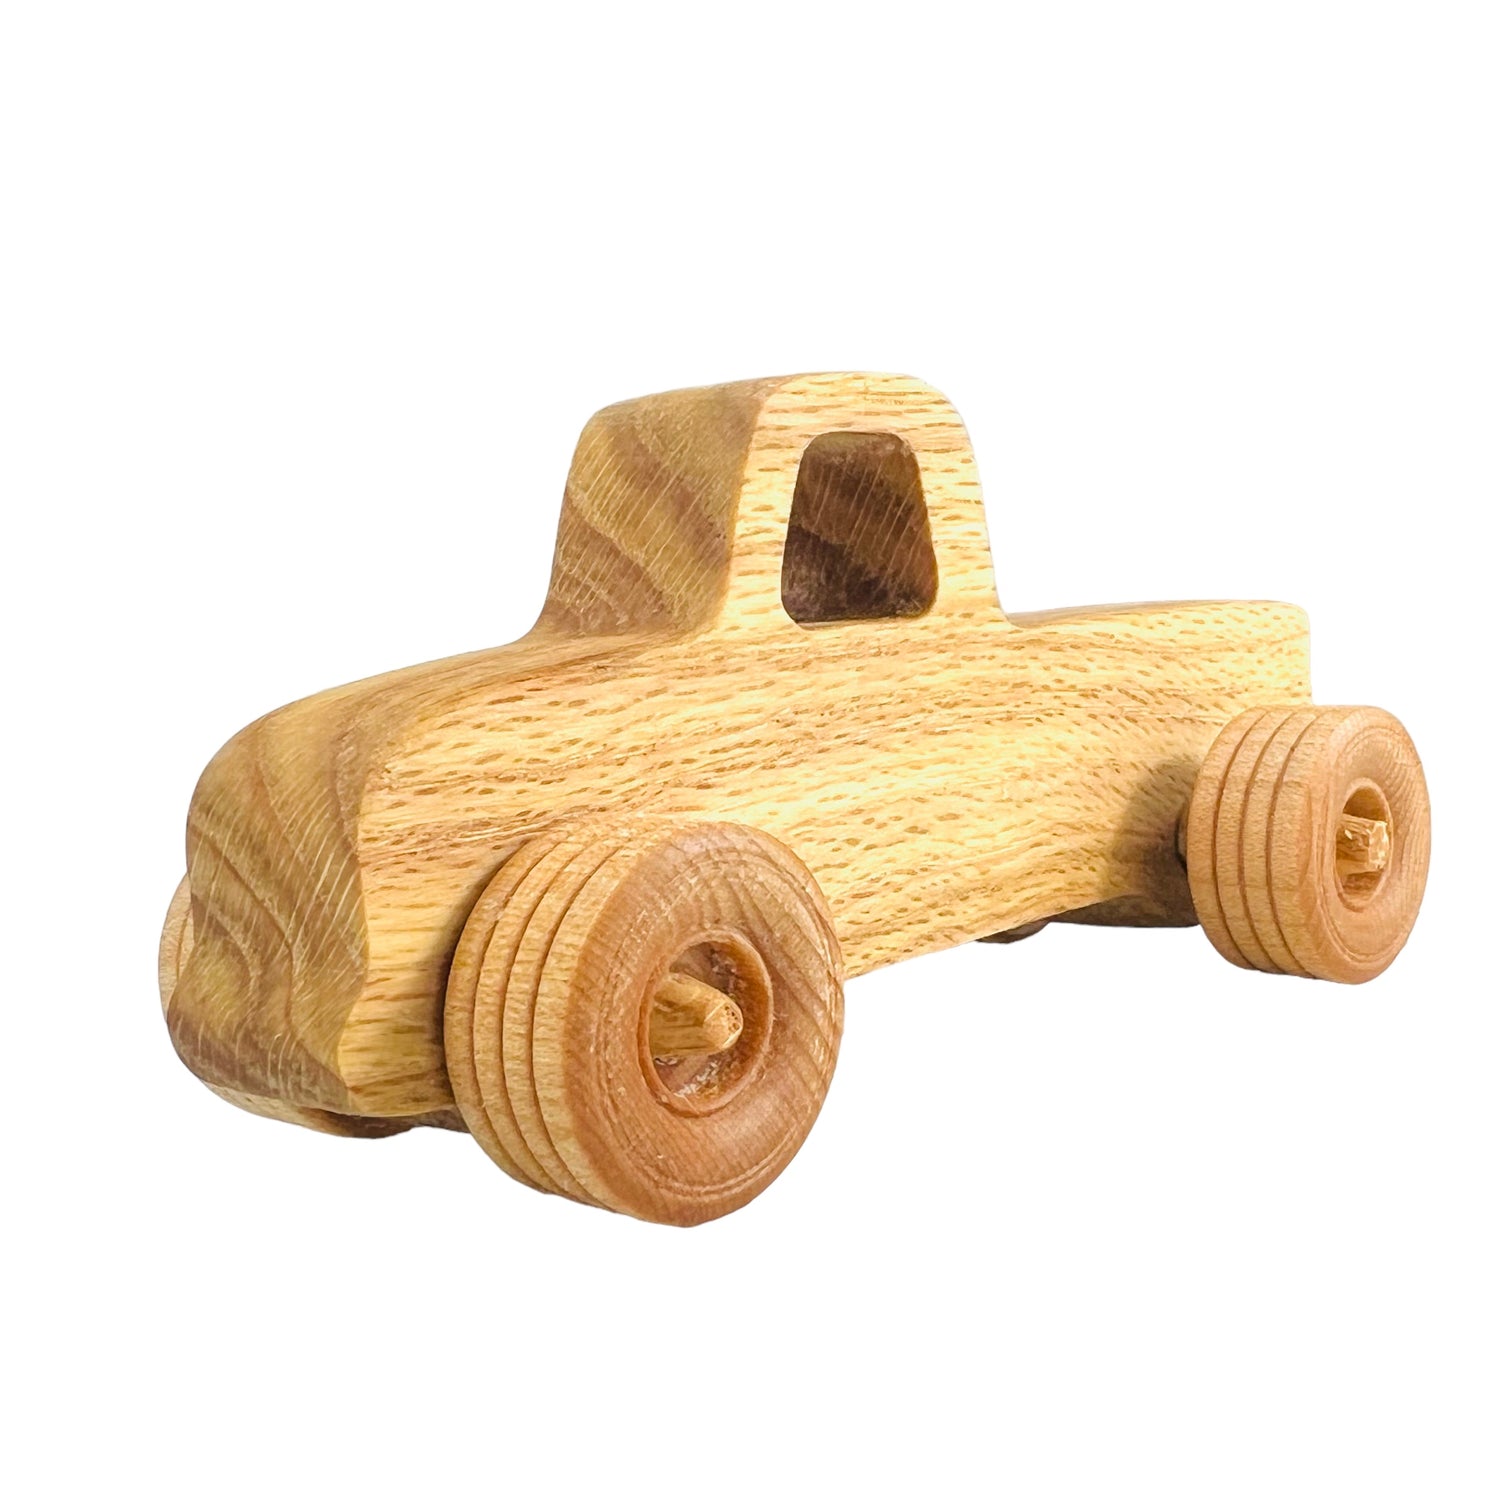 Wooden Toy - Classic Truck